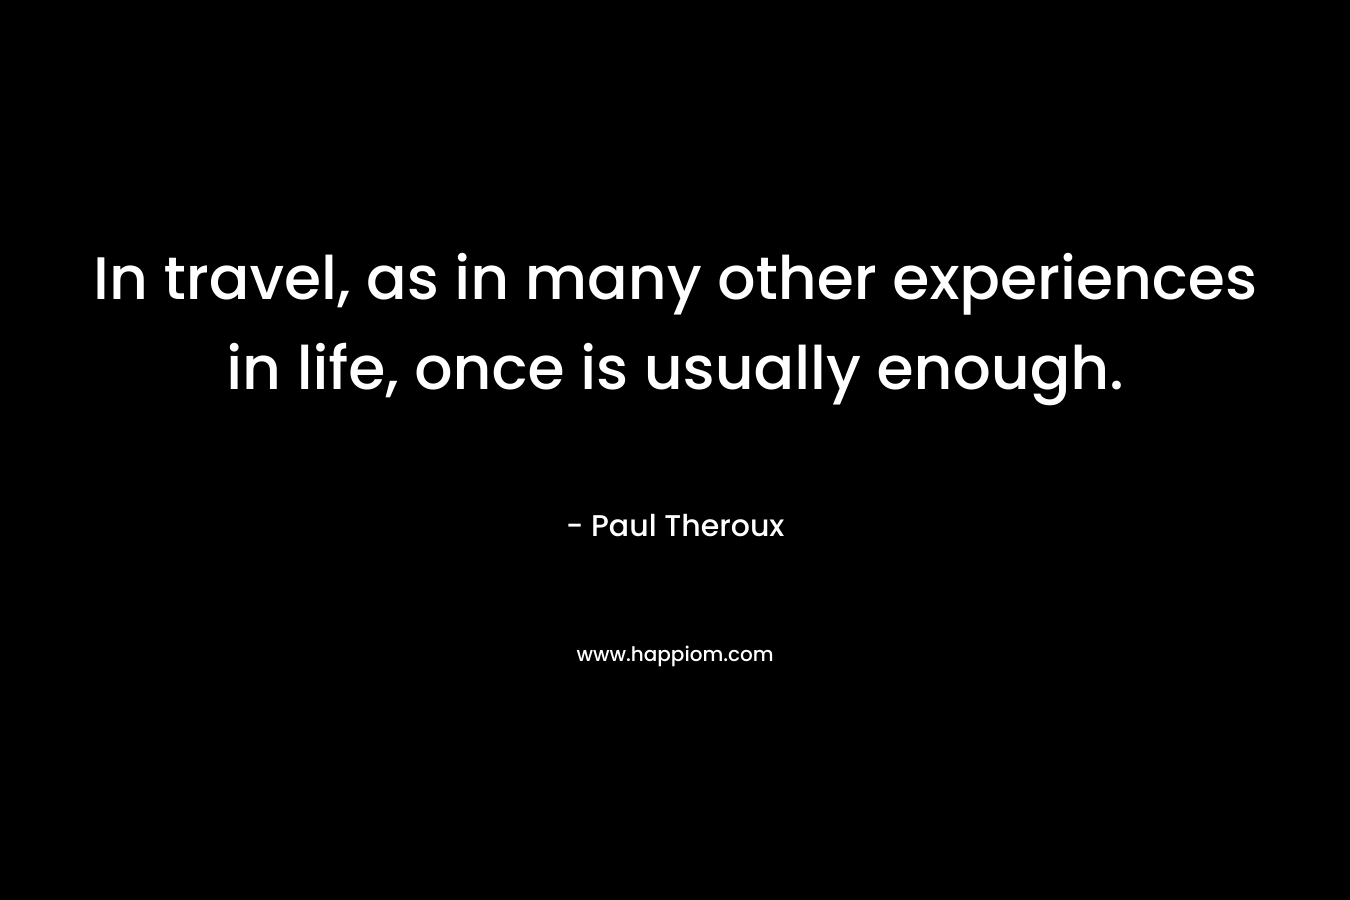 In travel, as in many other experiences in life, once is usually enough. – Paul Theroux